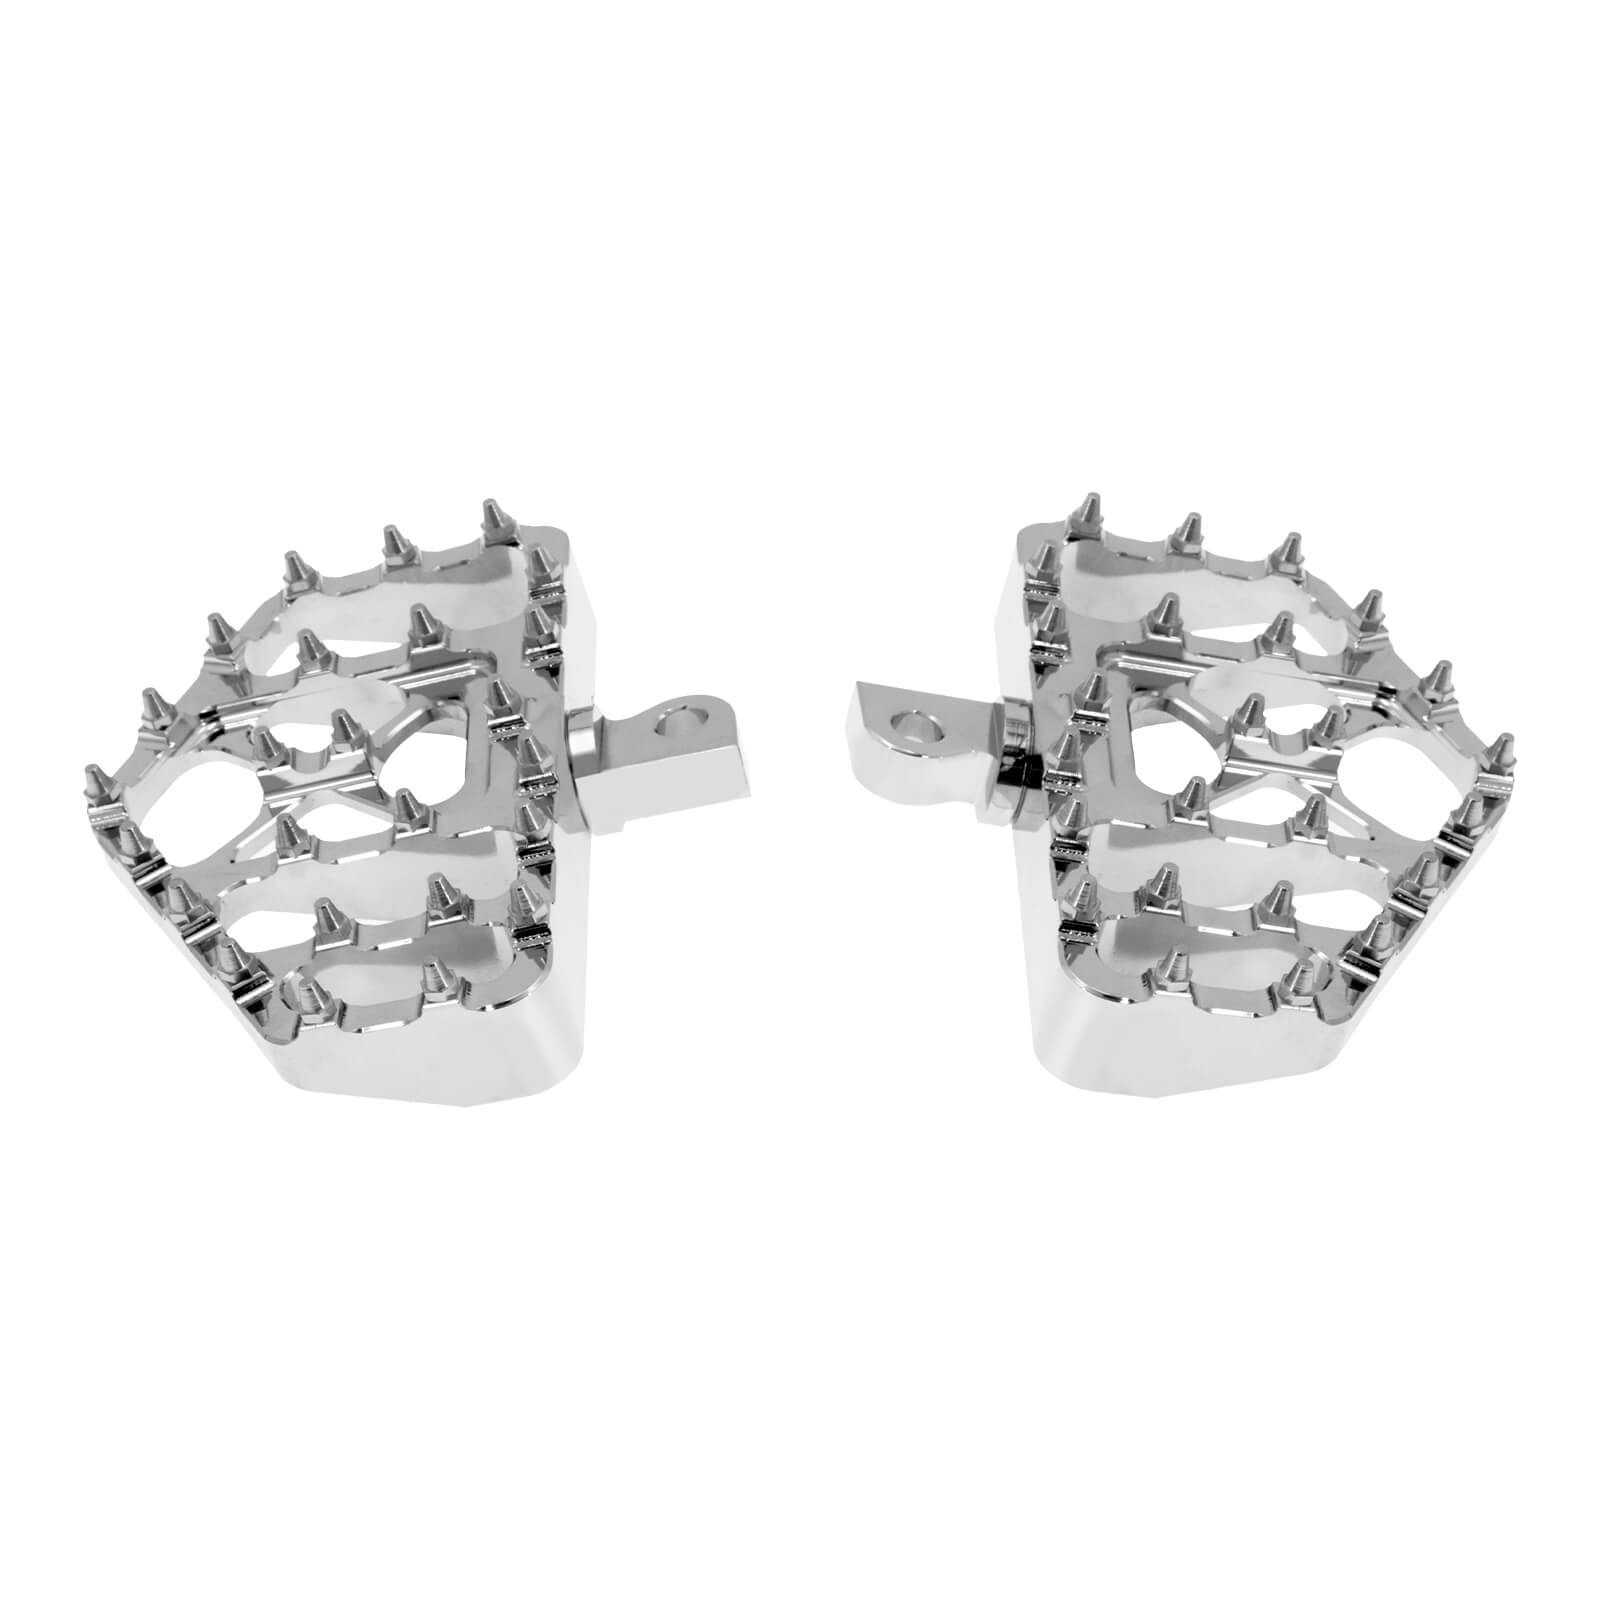 PE011702-mactions-motorcycle-mx-style-foot-pegs-pedal-for-harley-softail